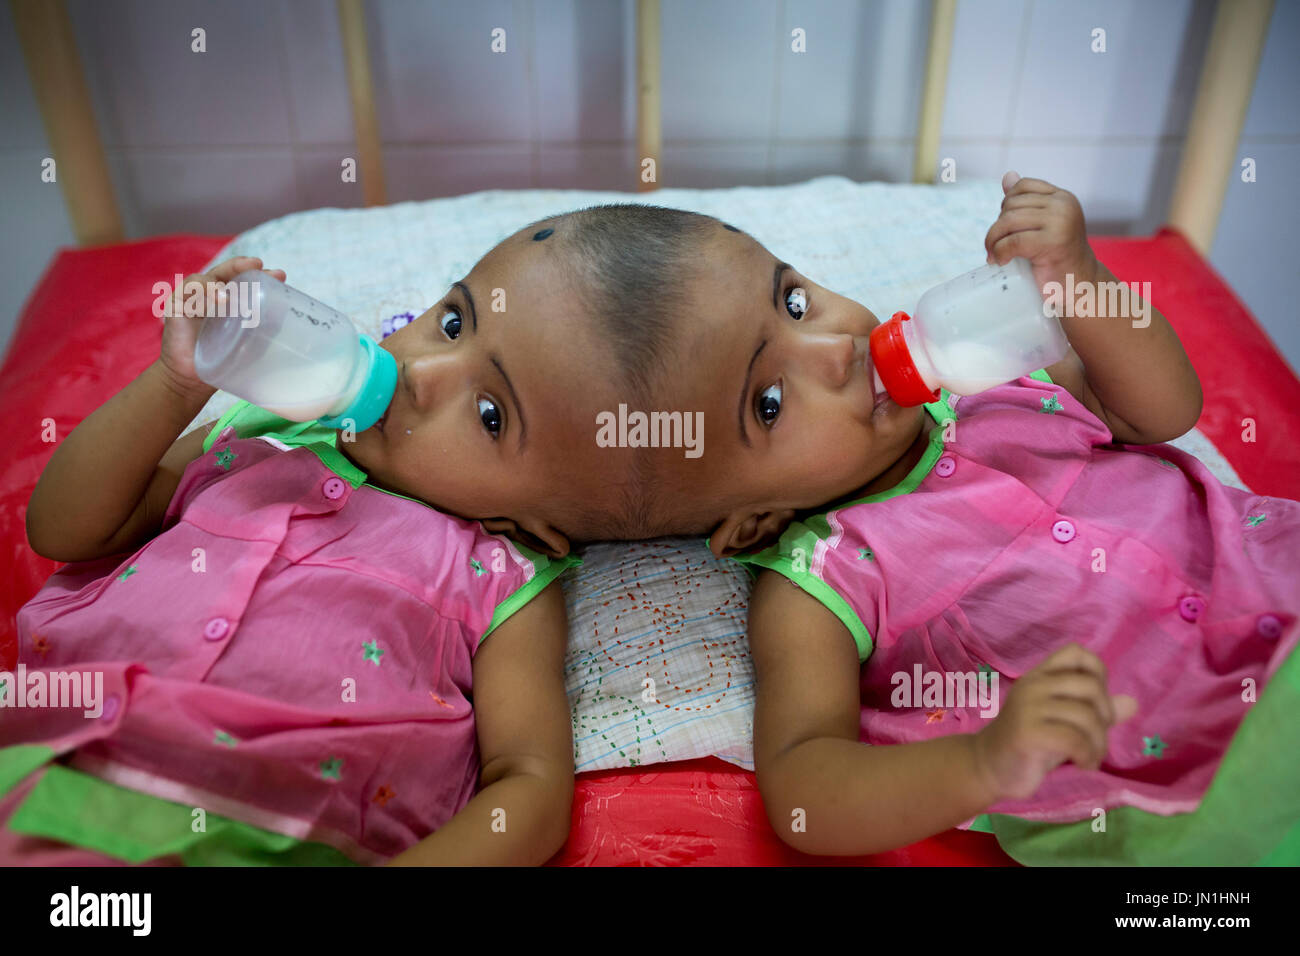 Dhaka, Bangladesh. 29th July, 2017. DHAKA, BANGLADESH - JULY 29 : Conjoined twin girls Rabeya Islam and Rokeya Islam drinking milk at a hospital in Dhaka, Bangladesh on July 29, 2017. Taslima Khatun, a school teacher, gave a birth of the conjoined headed twins on 16 July 2016 after a cesarean. The twins have been admitted at a government hospital for examination before potentially surgery to separate their heads. Credit: zakir hossain chowdhury zakir/Alamy Live News Stock Photo